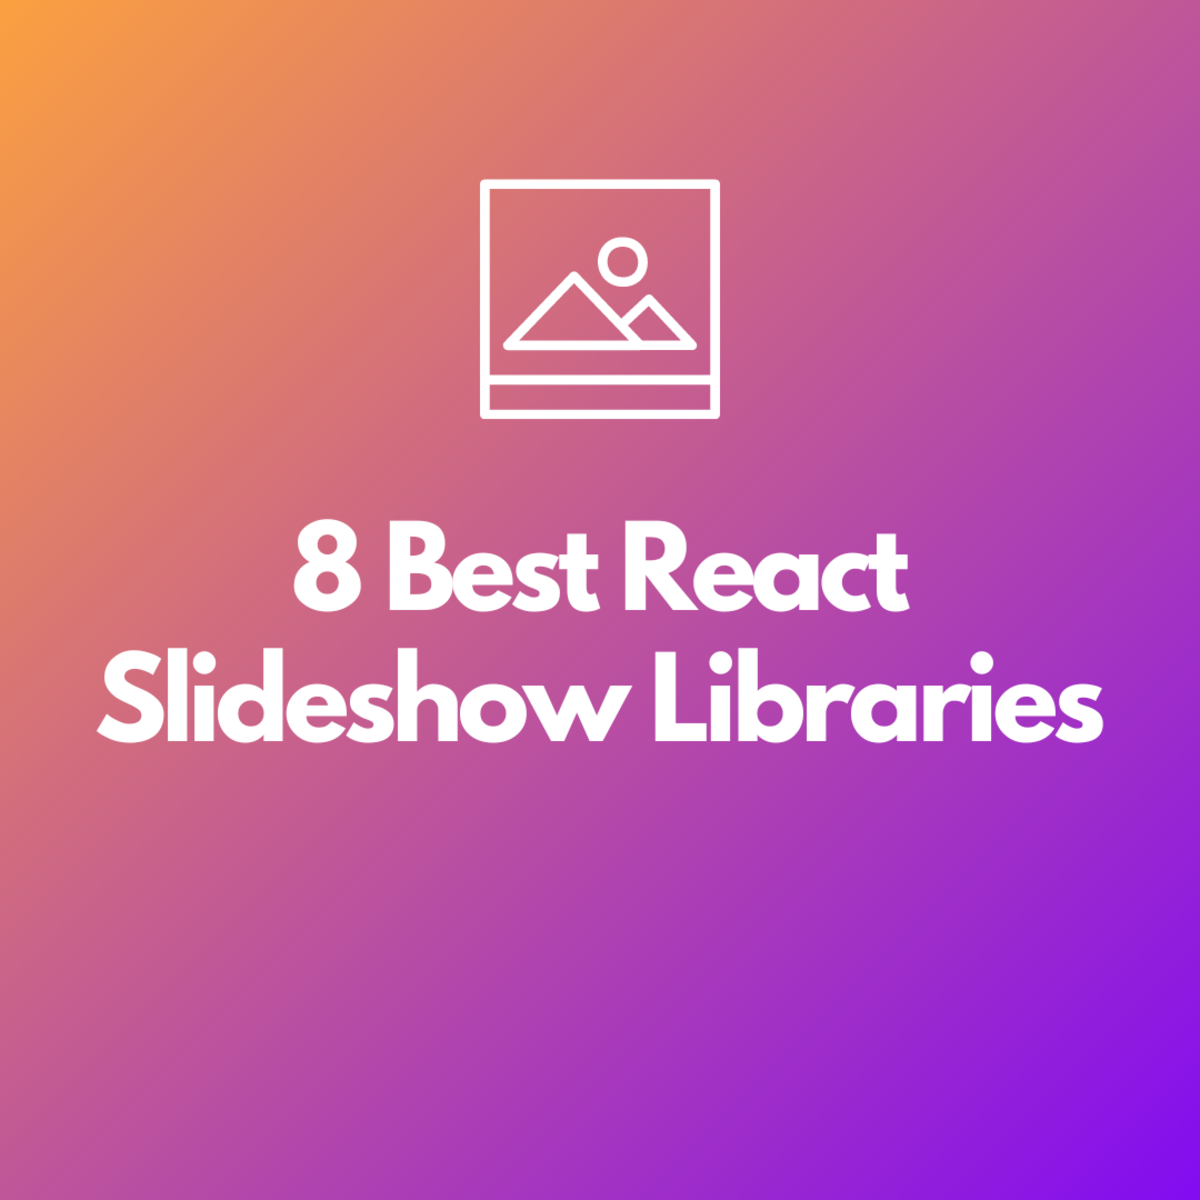 8 Best React Slideshow Libraries: The Ultimate List